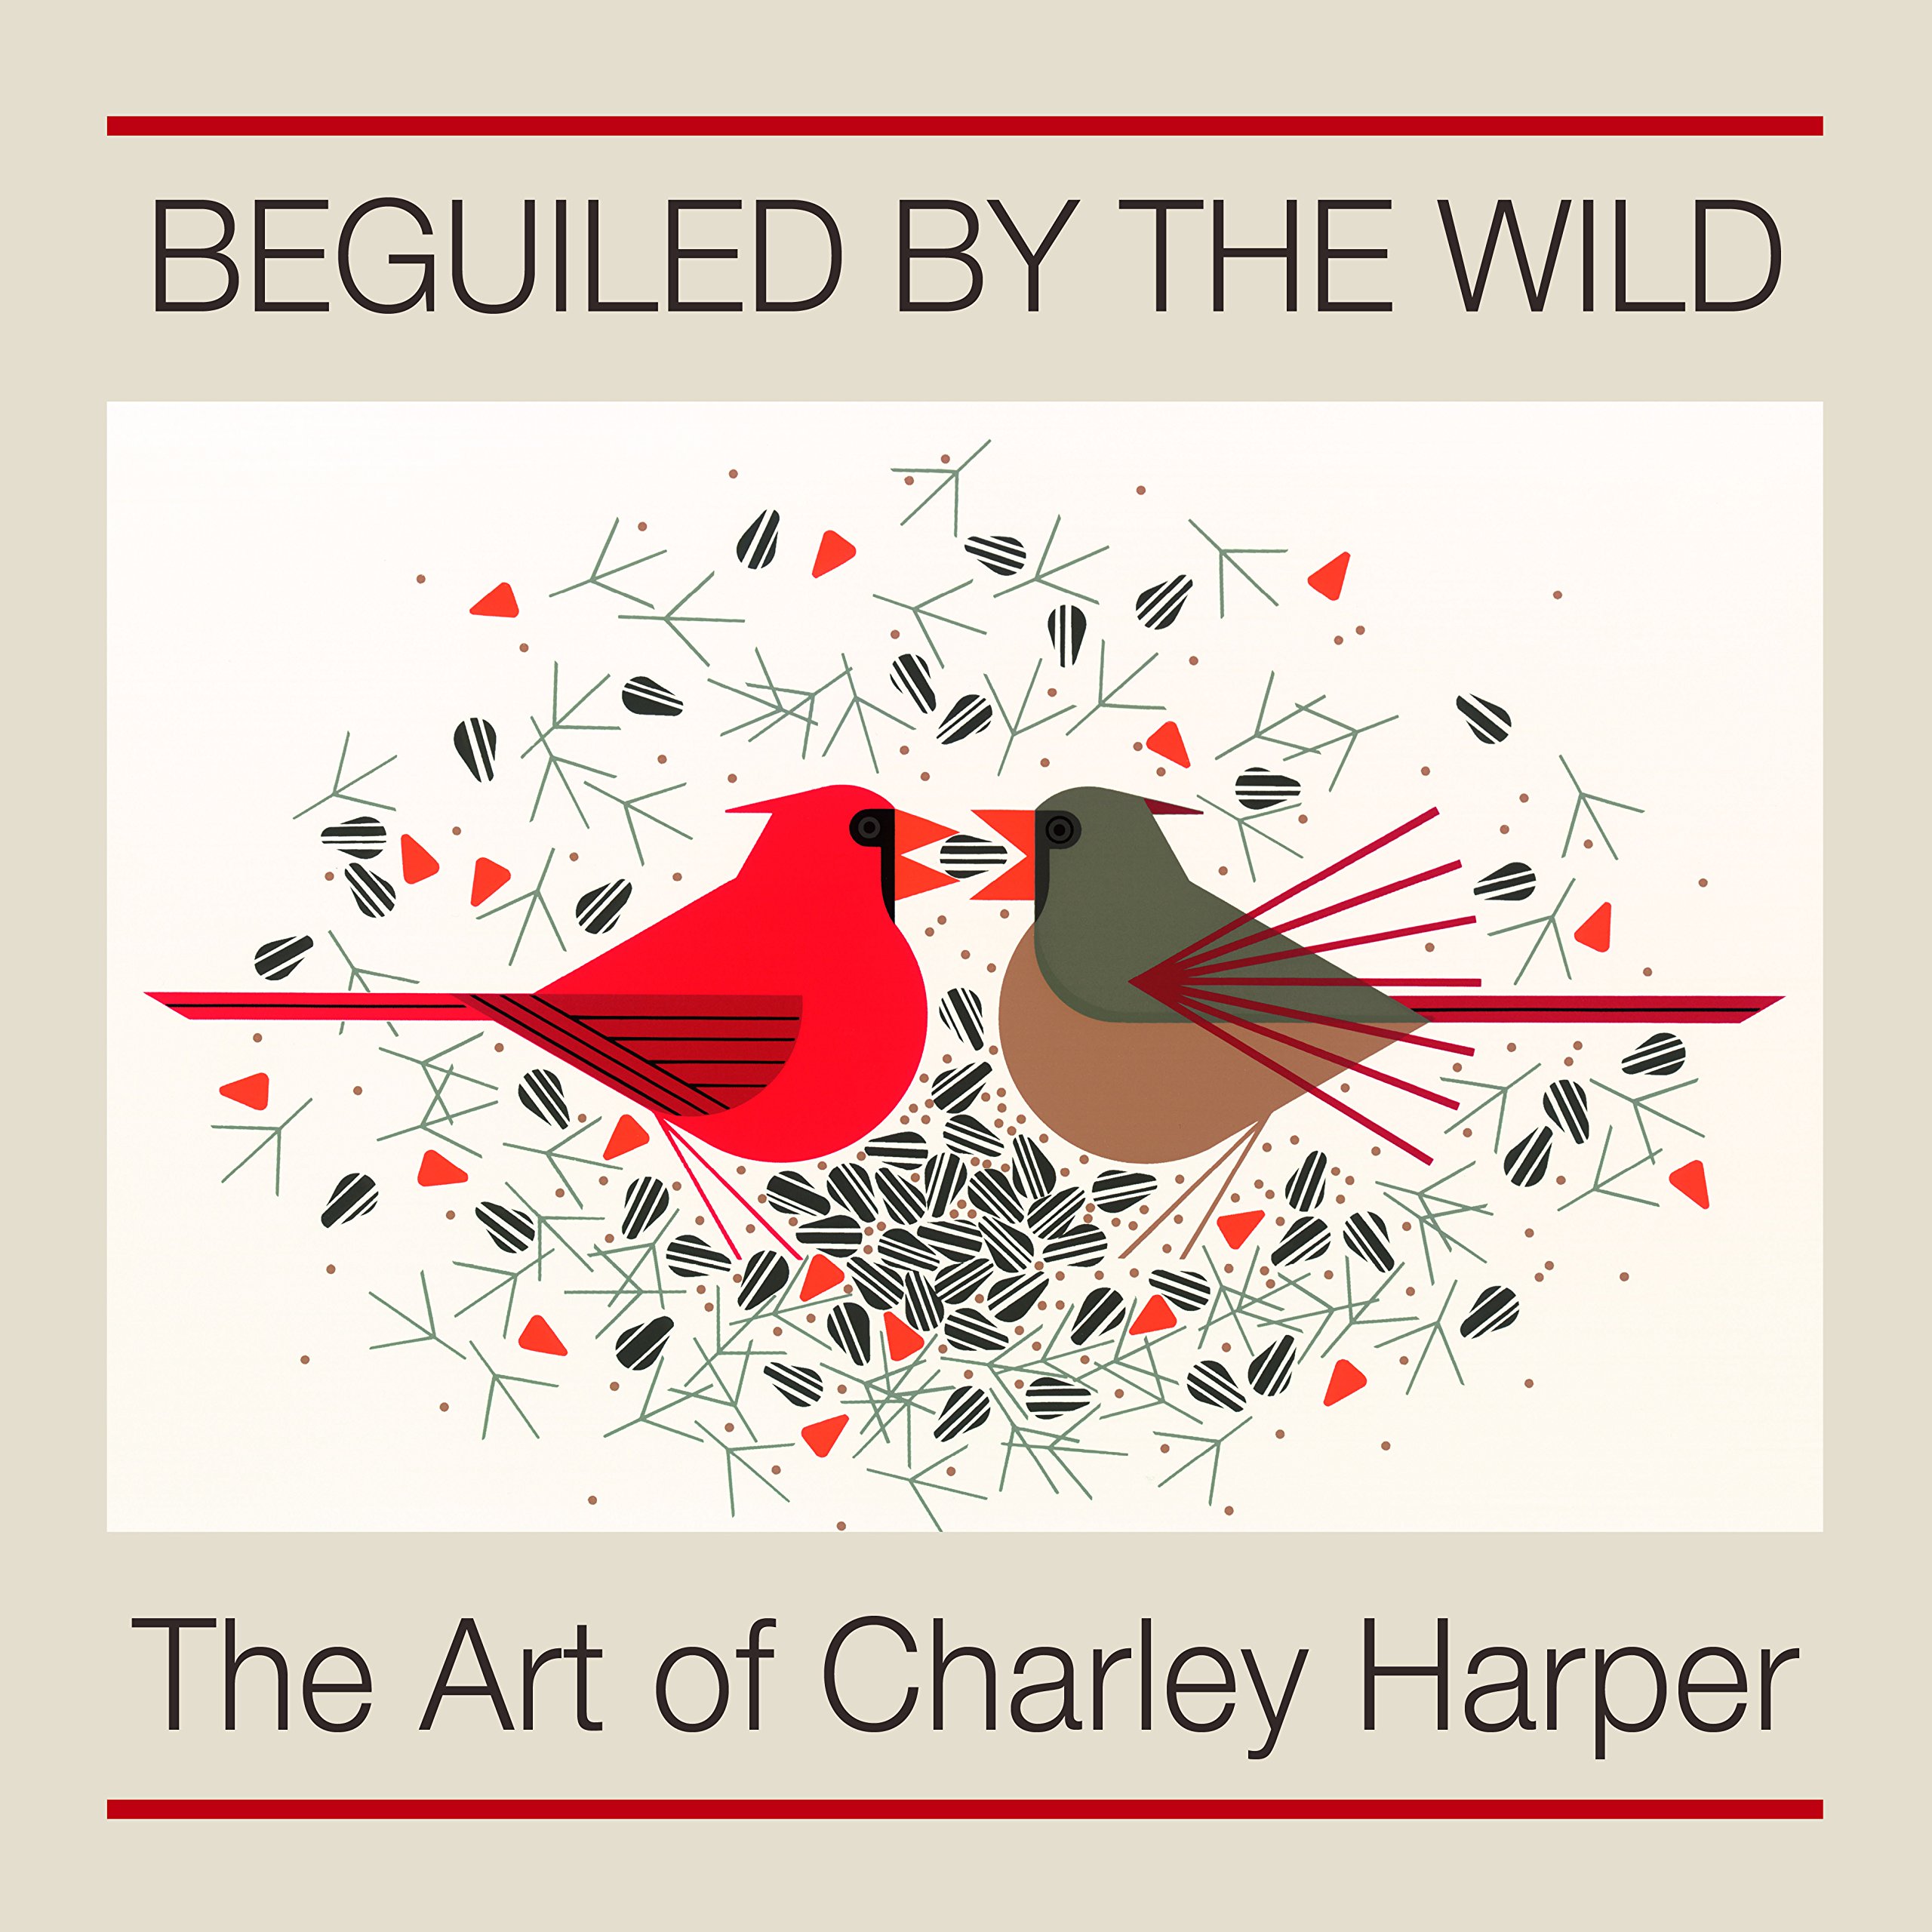 Charley Harper: Beguiled by the Wild, the Art of Charley Harper